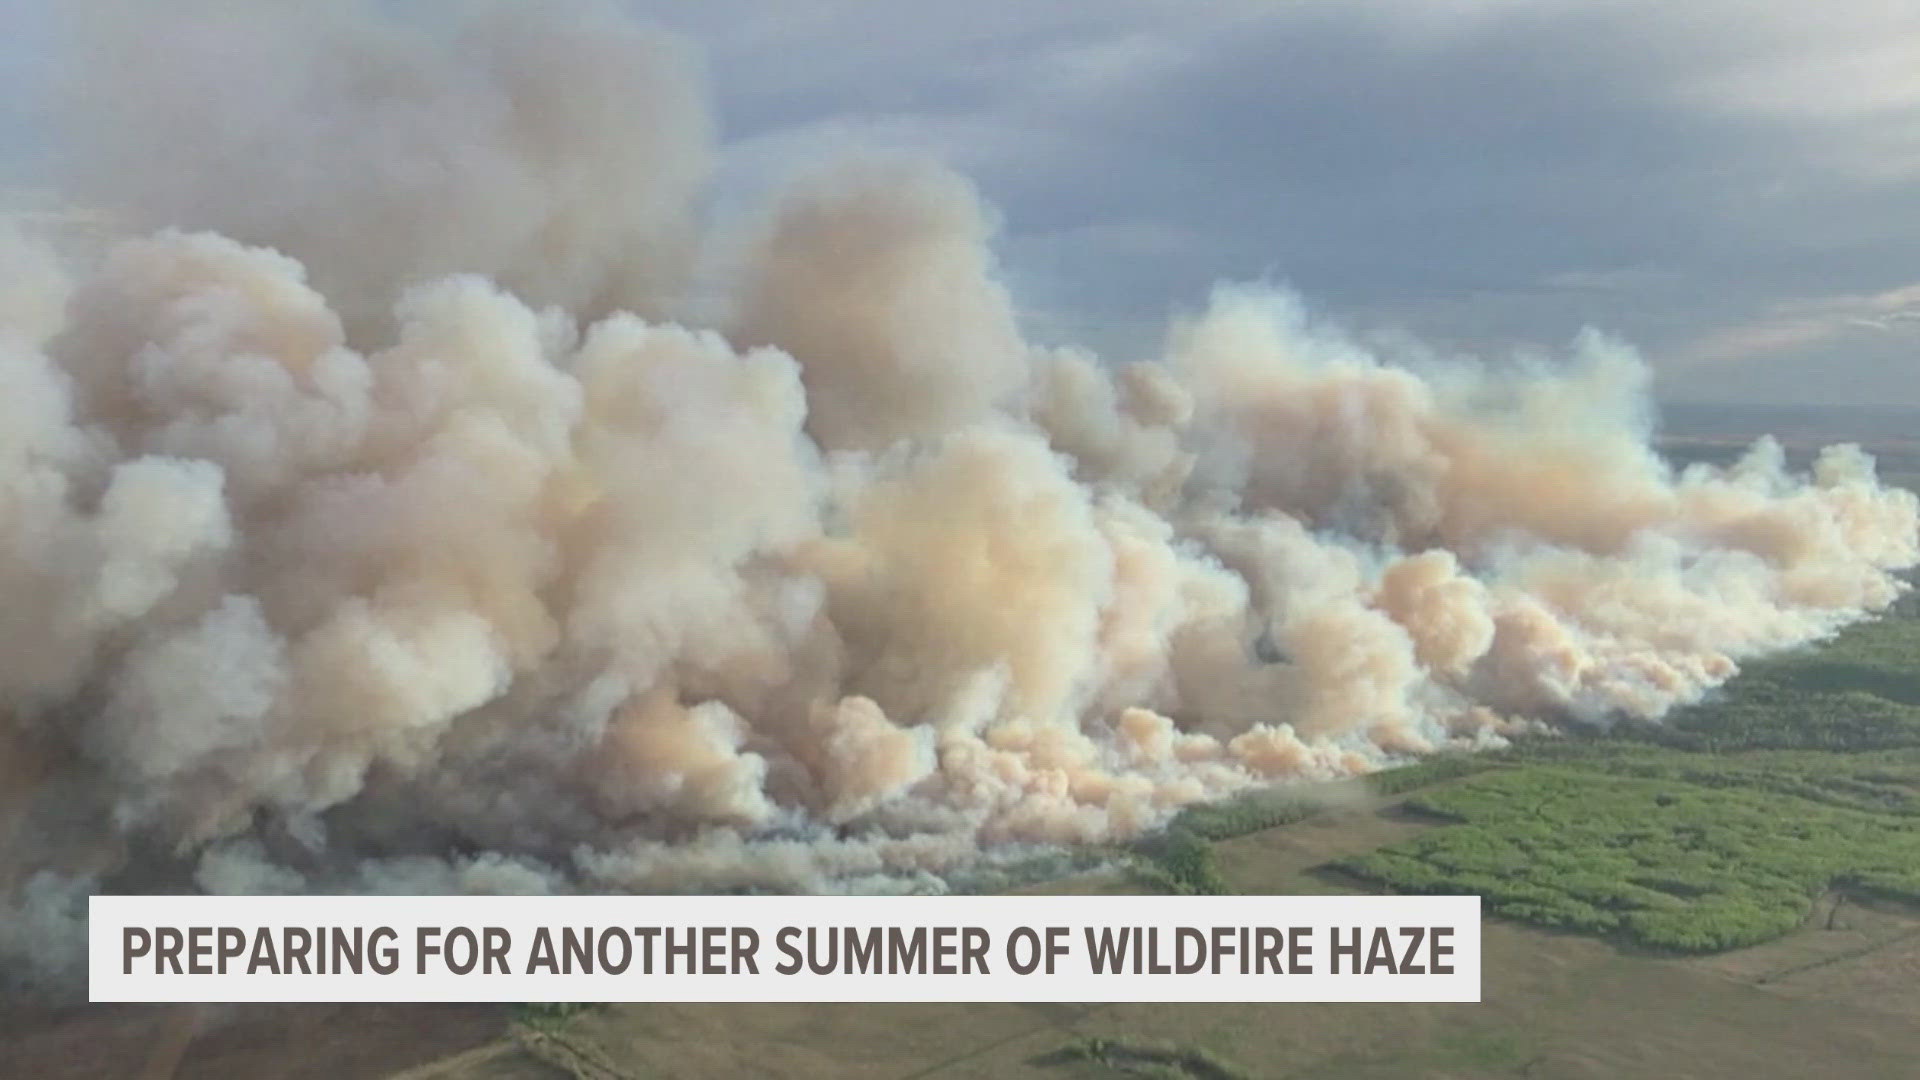 EGLE is preparing for more wildfire haze in Michigan this year as wildfires in Canada continue.